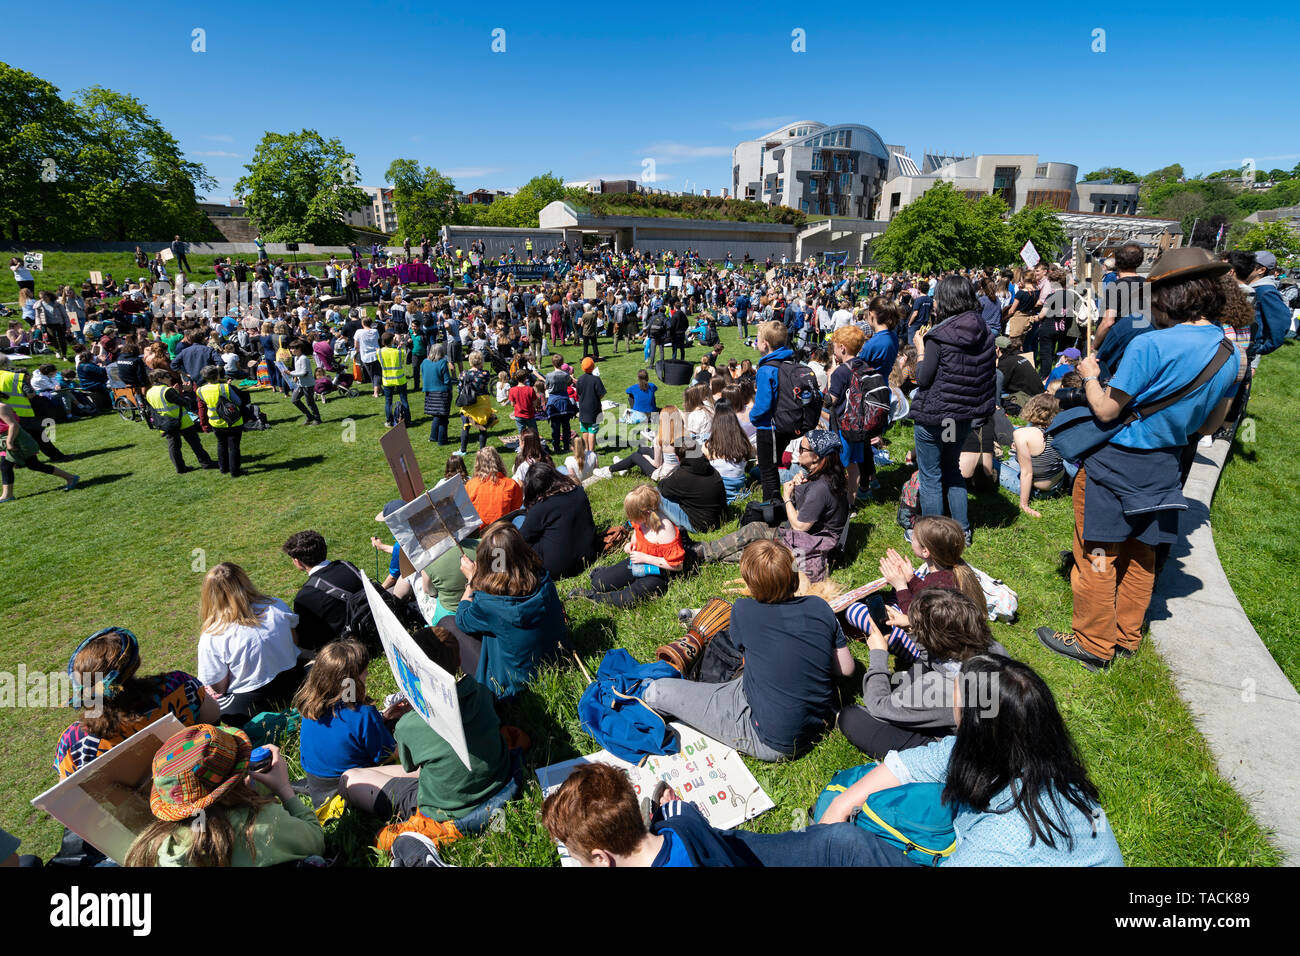 Edinburgh, Scotland, UK. 24th May, 2019. Scottish Youth Climate Strike by schoolchildren in central Edinburgh. Students took a day off school to meet in The Meadows park before marching along the Royal Mile to a protest held outside the Scottish Parliament at Holyrood. The protest is to coincide with the second global school strike for climate - along with over 1500 locations around the world. The strikes were started in August 2018 by the Swedish schoolgirl Greta Thunberg and have since been mirrored across the world.    Credit: Iain Masterton/Alamy Live News Stock Photo